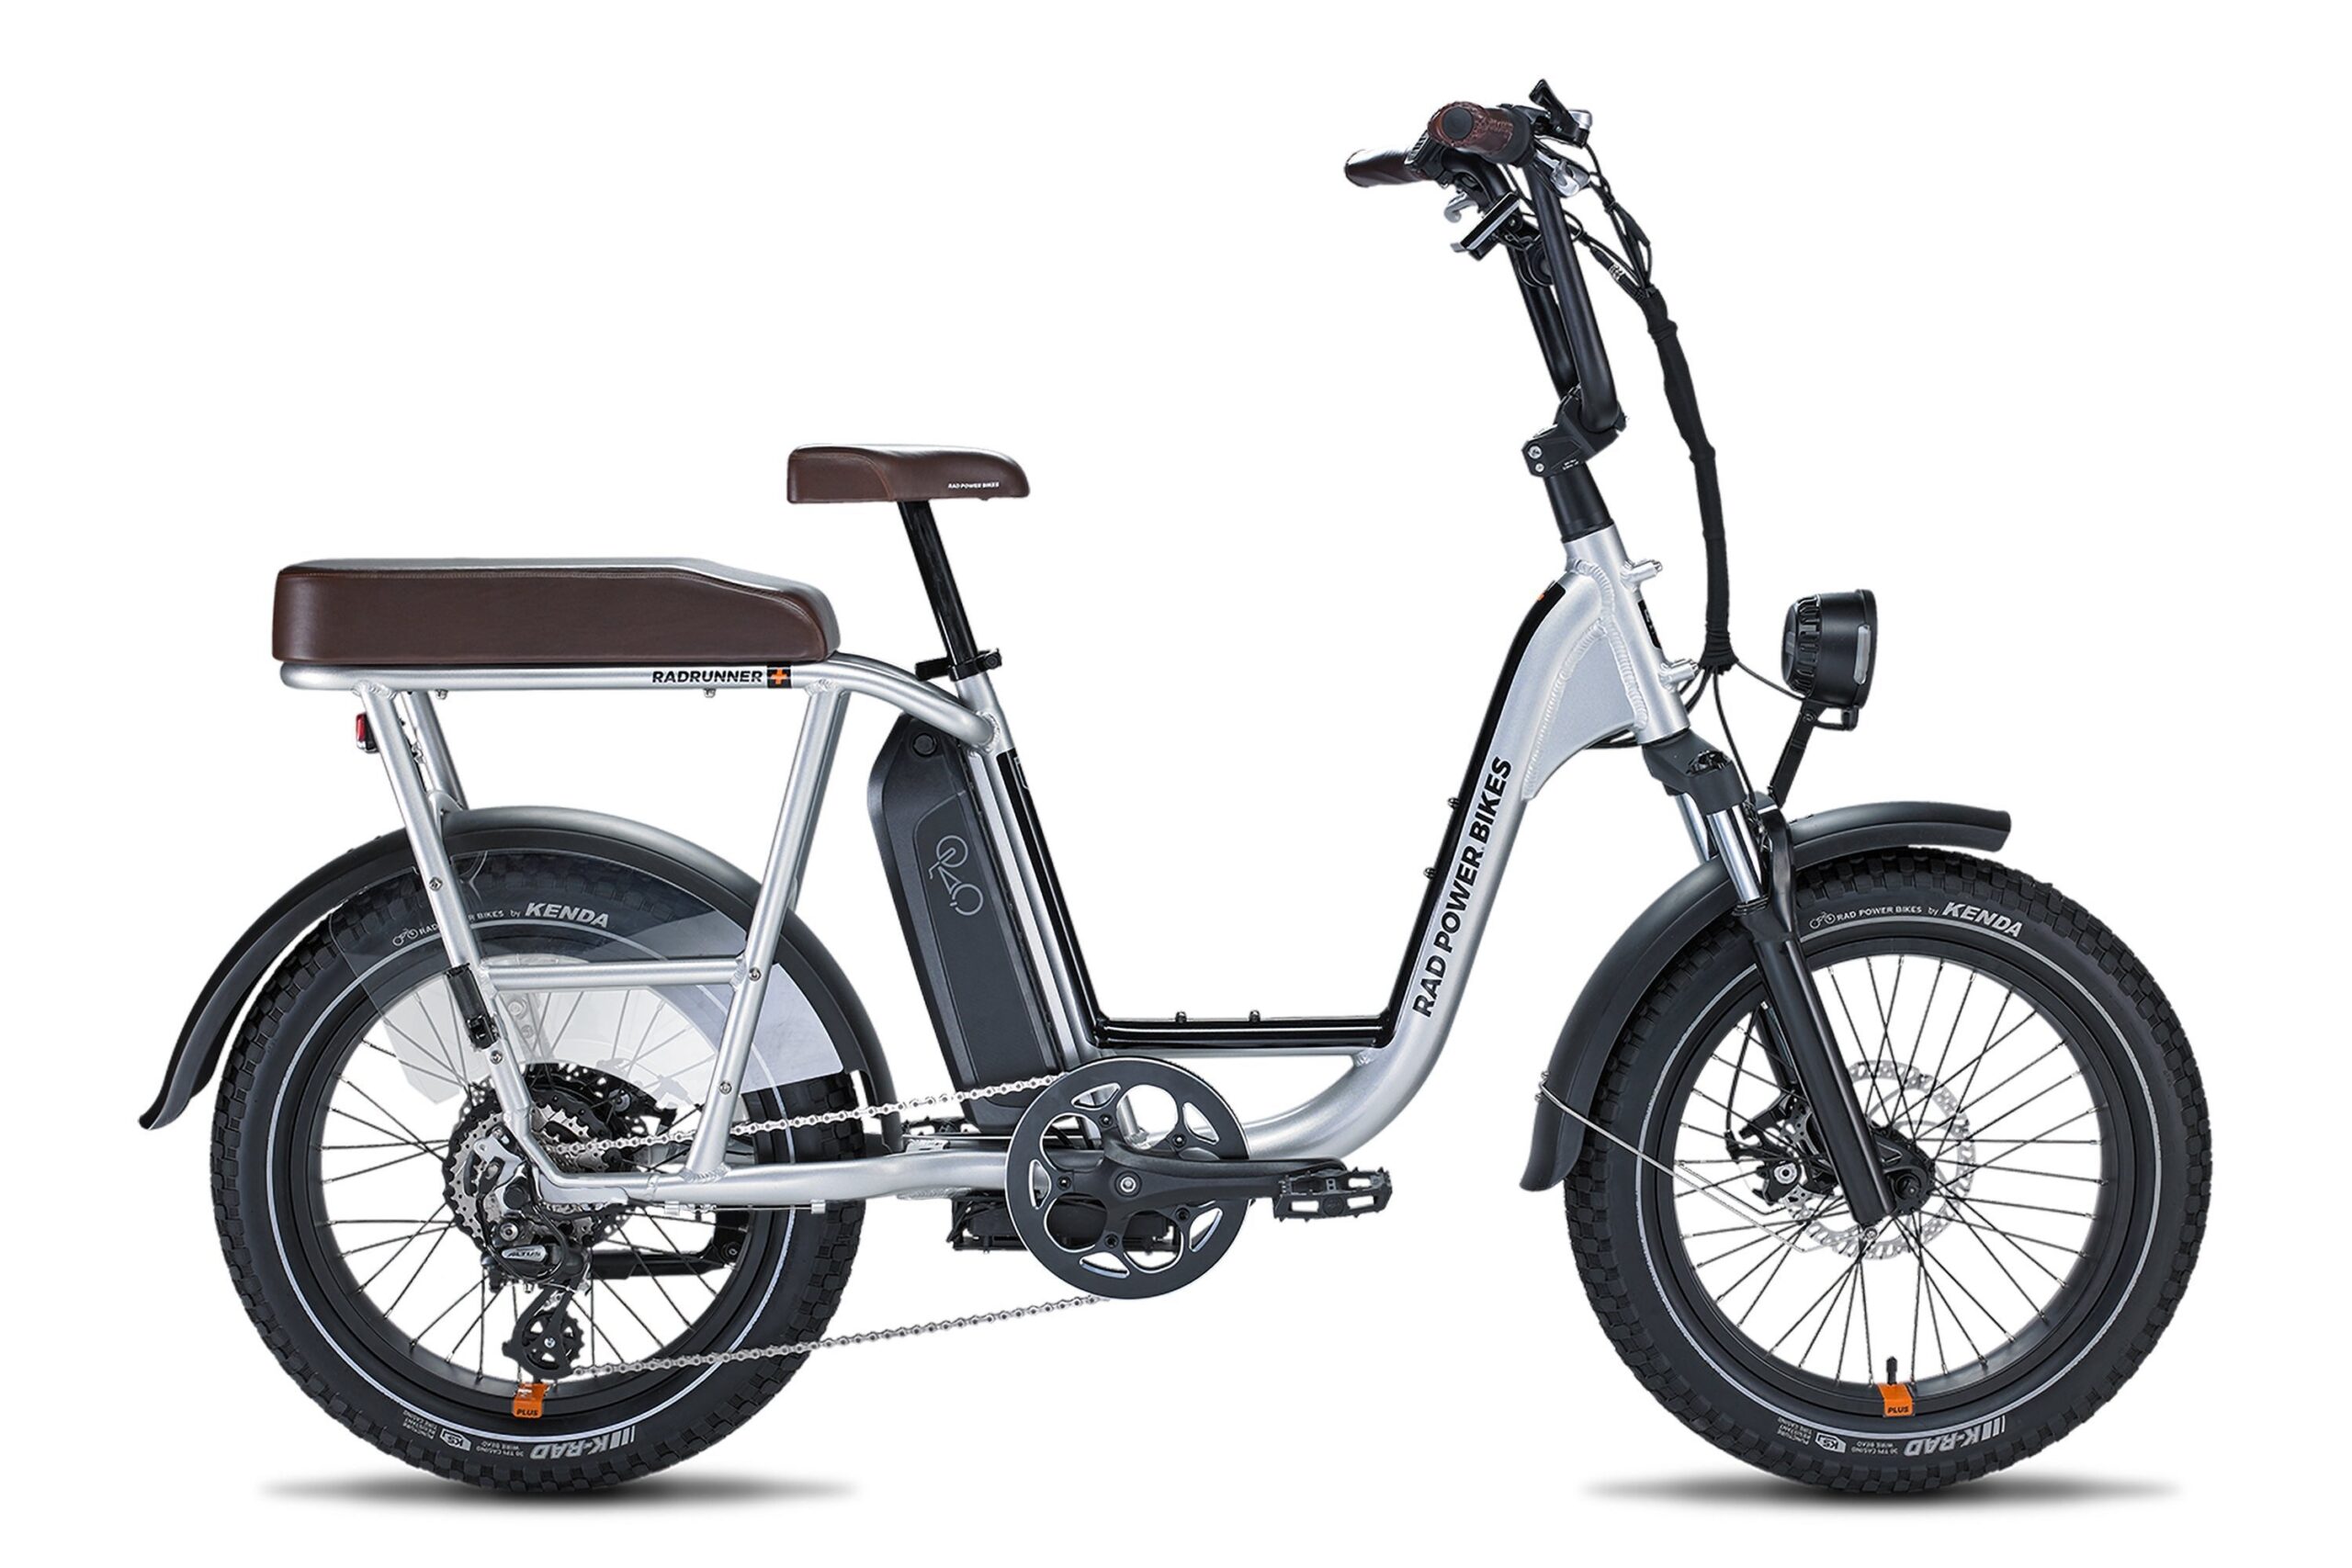 I’m stuck between choosing to buy the RadRunner Plus -passenger seat should be removable- and the ET Cycle F1000. I’m wondering if either bike option can be serviceable outside of Washington, as in, I can take either bike to any shop if they’re in need of repairs, whether electronics-wise or other.